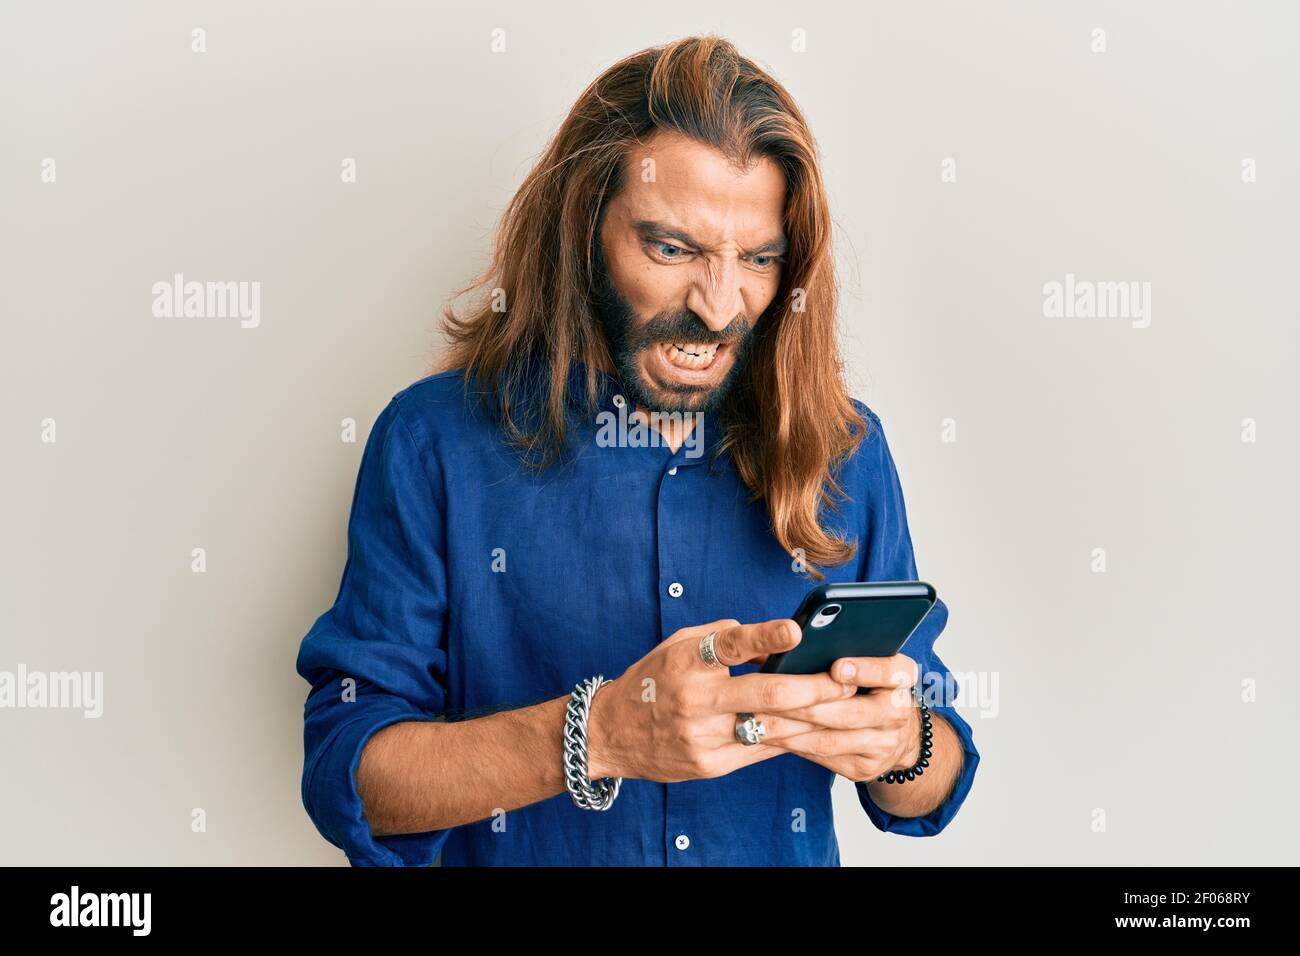 Premium Photo  Handsome bearded guy holds smartphone and plays online games  joyful man wearing a black stylish hat and a blue shirt crazy emotions